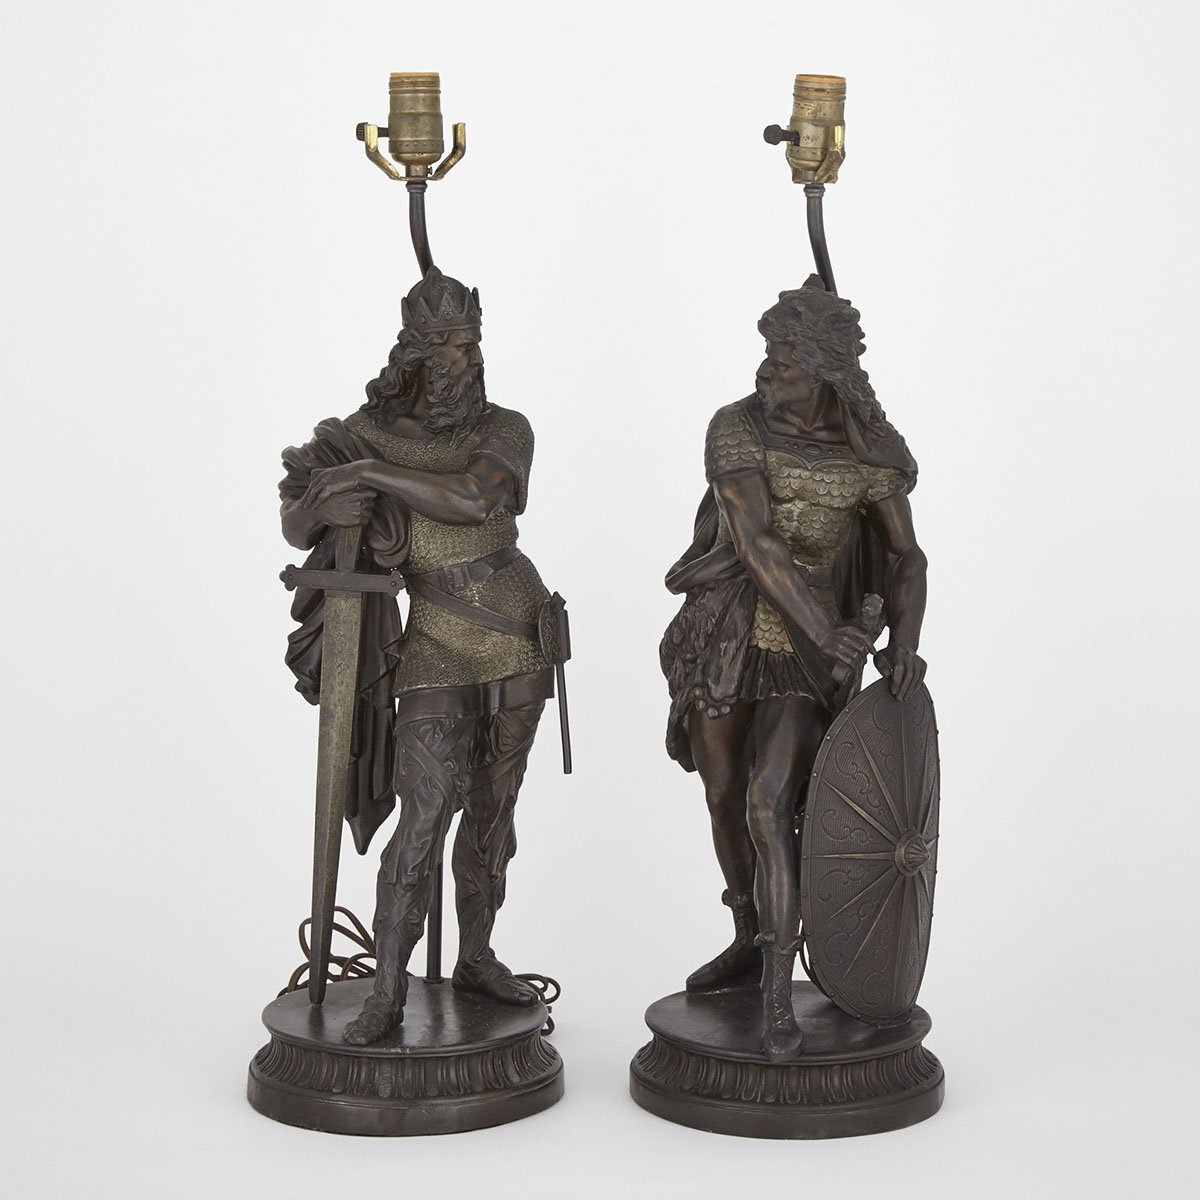 Pair of Patinated White Metal Figural Table Lamps Modelled as Nordic Vikings, late 19th/early 20th century